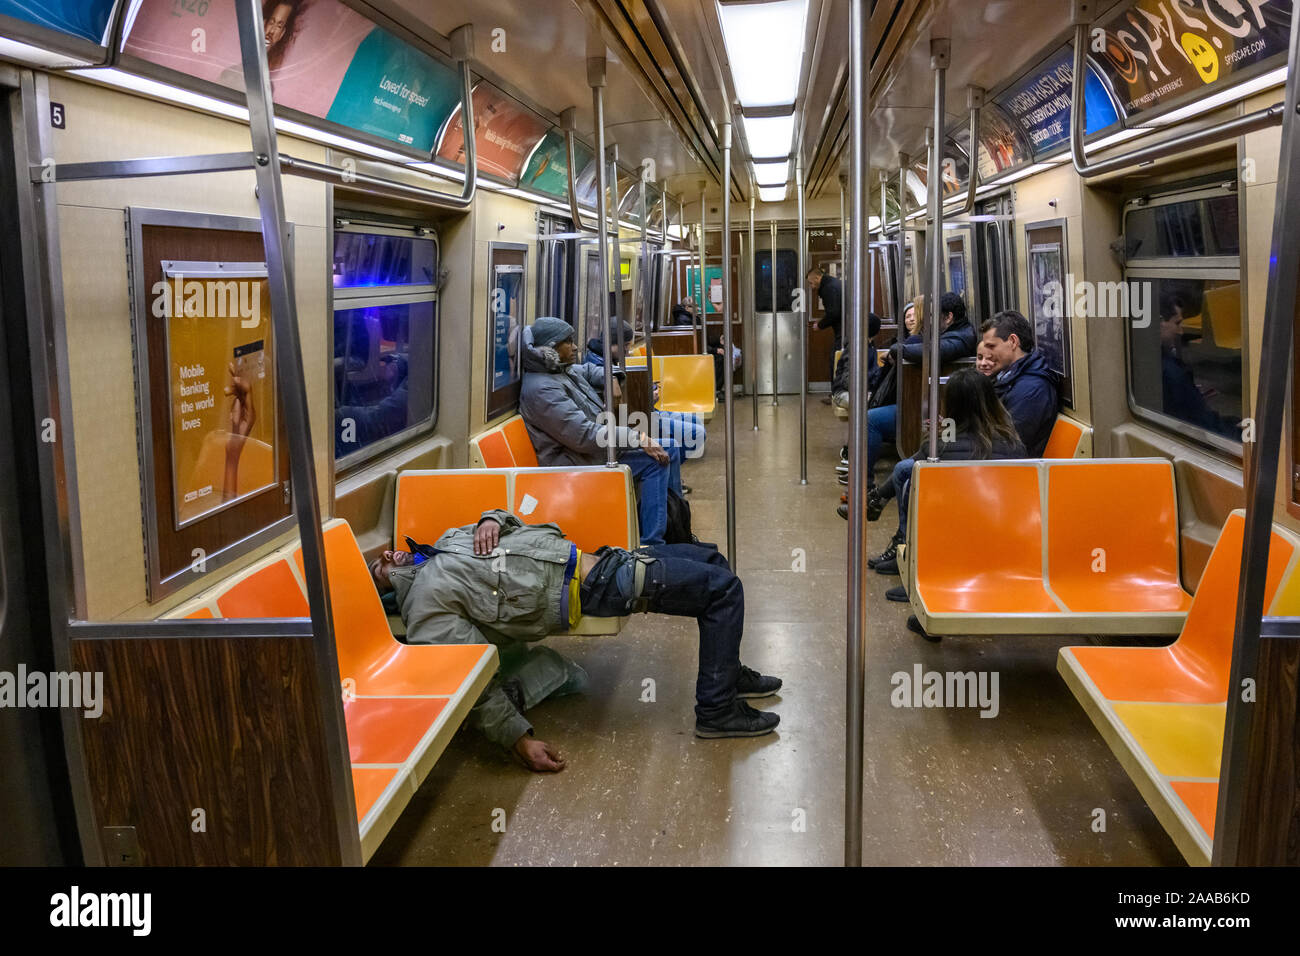 New York, USA, 9 November 2019.  Passengers ignore an indigent man sleeping in the subway in New York City.   Credit: Enrique Shore/Alamy Stock Photo Stock Photo